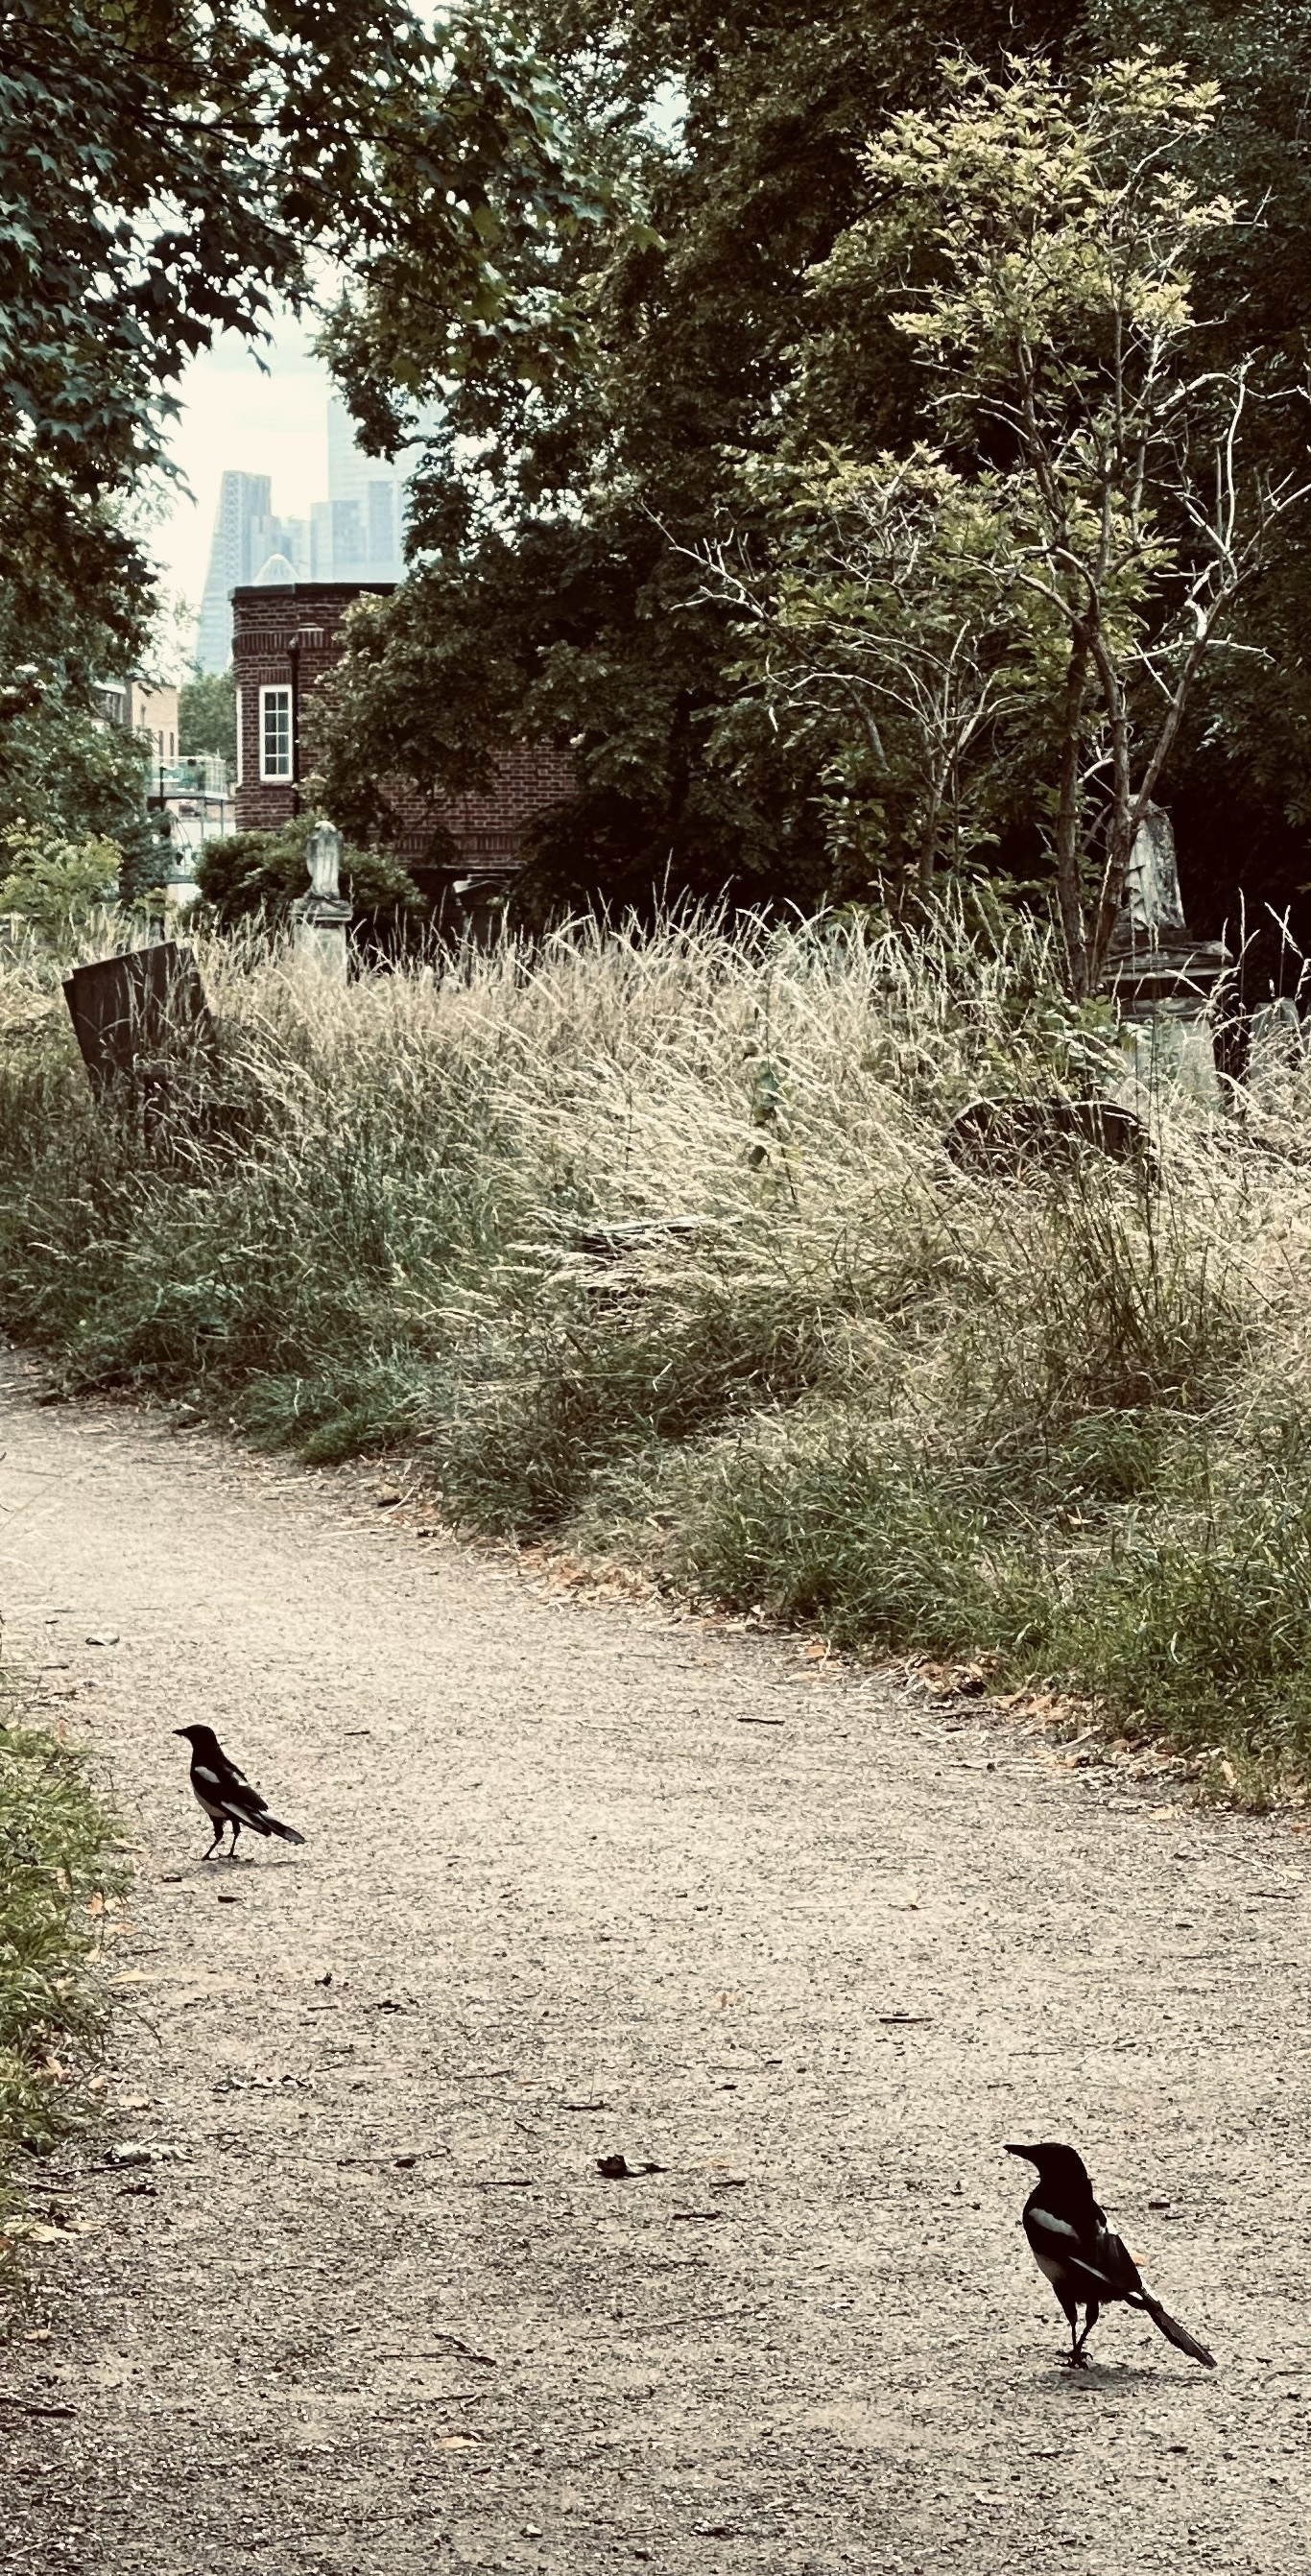 Two magpies stood on a dirt path in a cemetery. Skyscrapers from the city of London can be seen in the background.